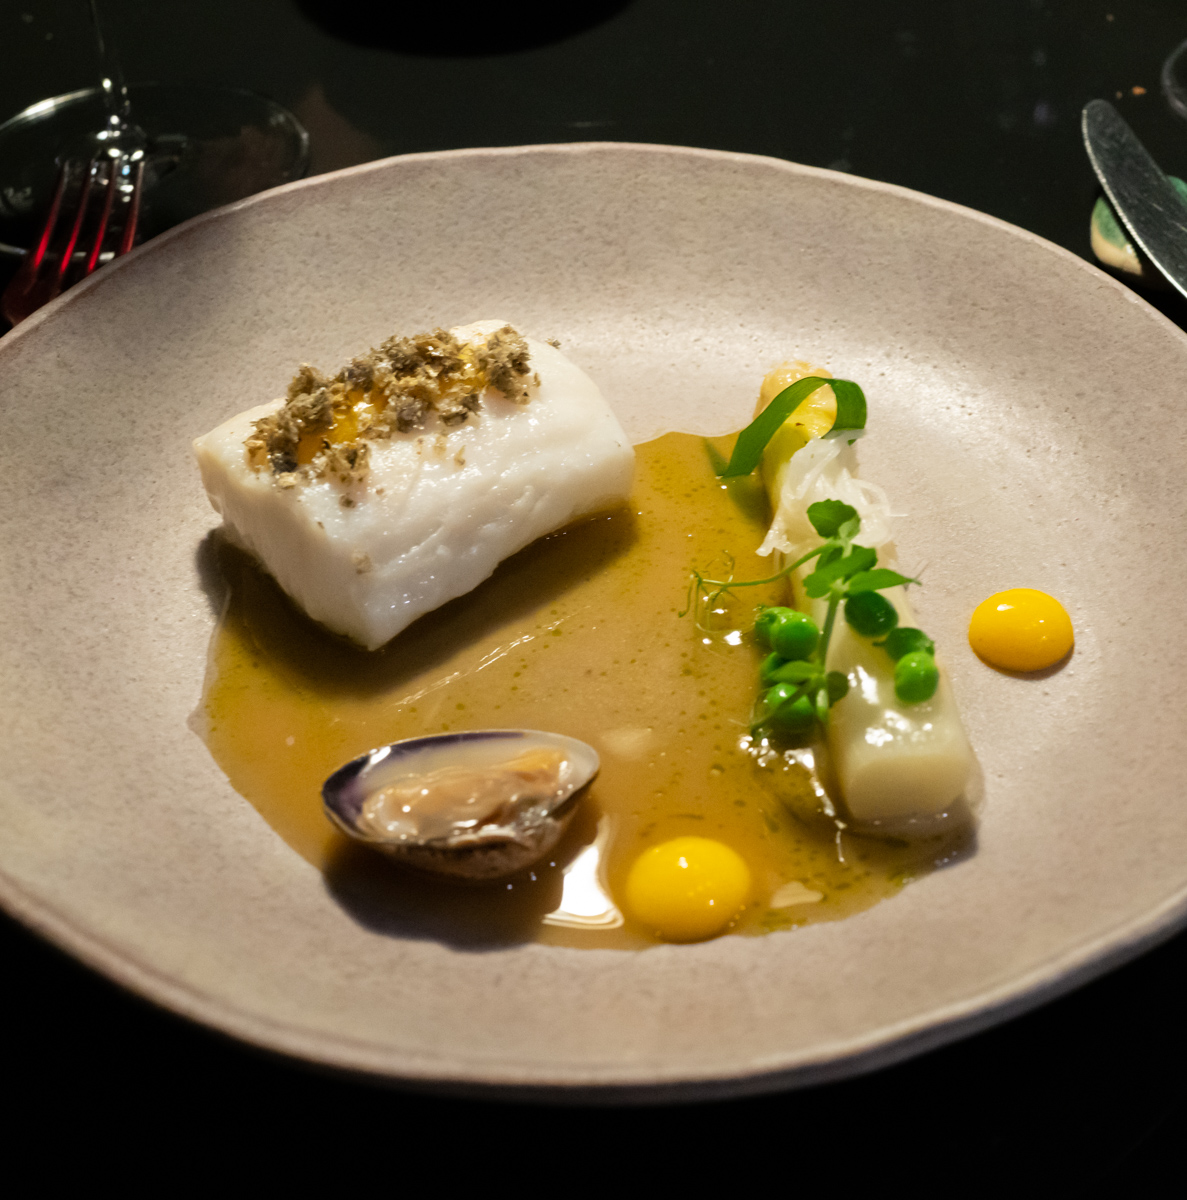 The seafood course consisted of a simple piece of hake topped with “crunchies” made from the skin (removed and deep fried). This came with a beautiful piece of white asparagus (which was in season at the time), peas, and a sauce made from fish essence and egg. On the side, dollops of “egg yolk“ completed the plate.